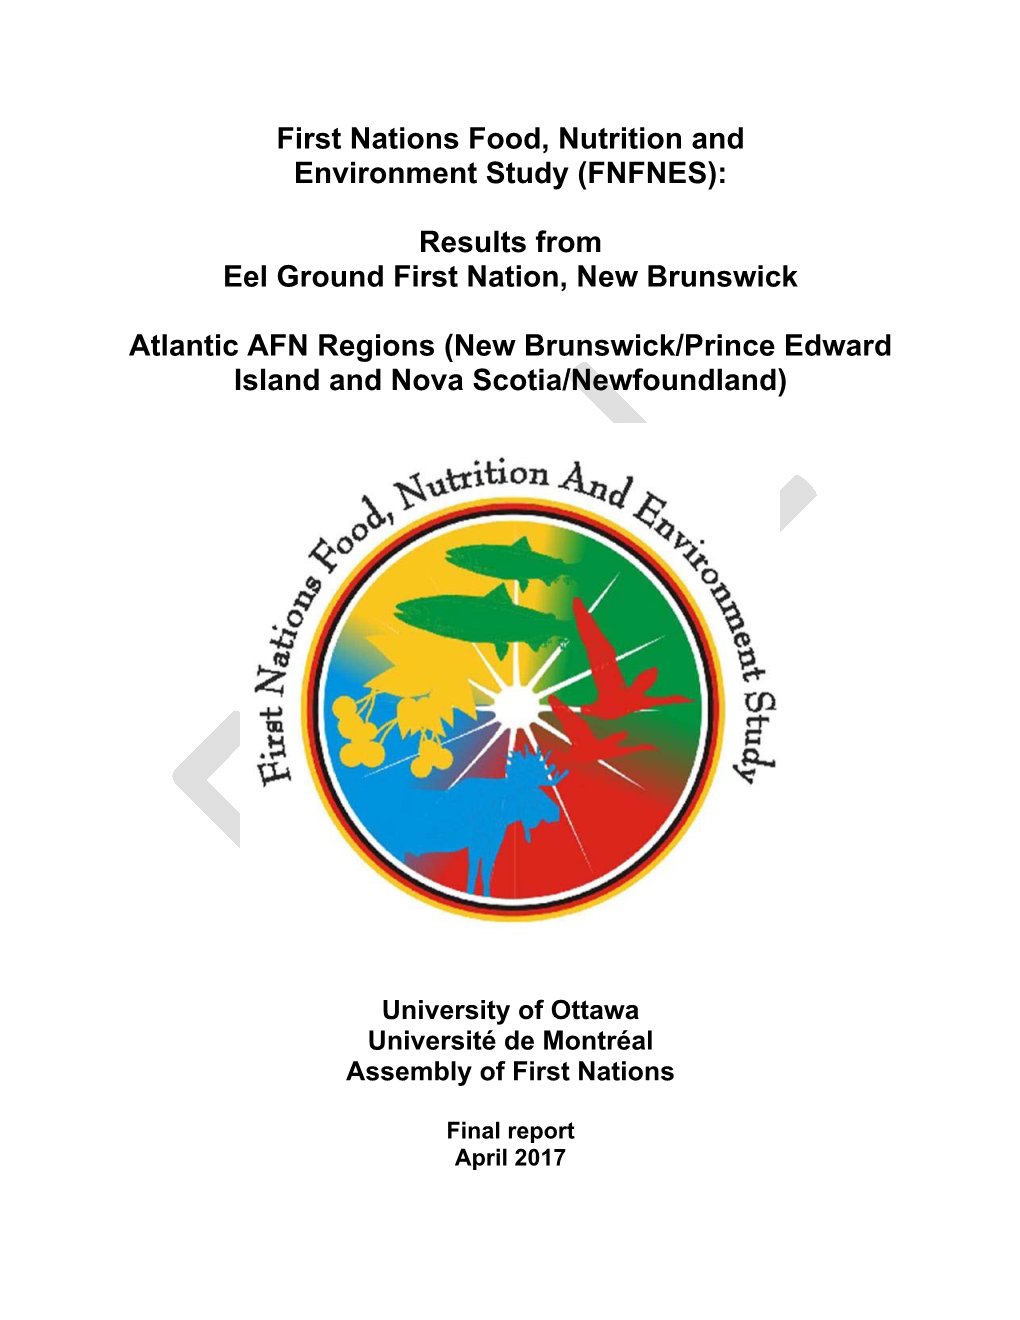 First Nations Food, Nutrition and Environment Study (FNFNES)